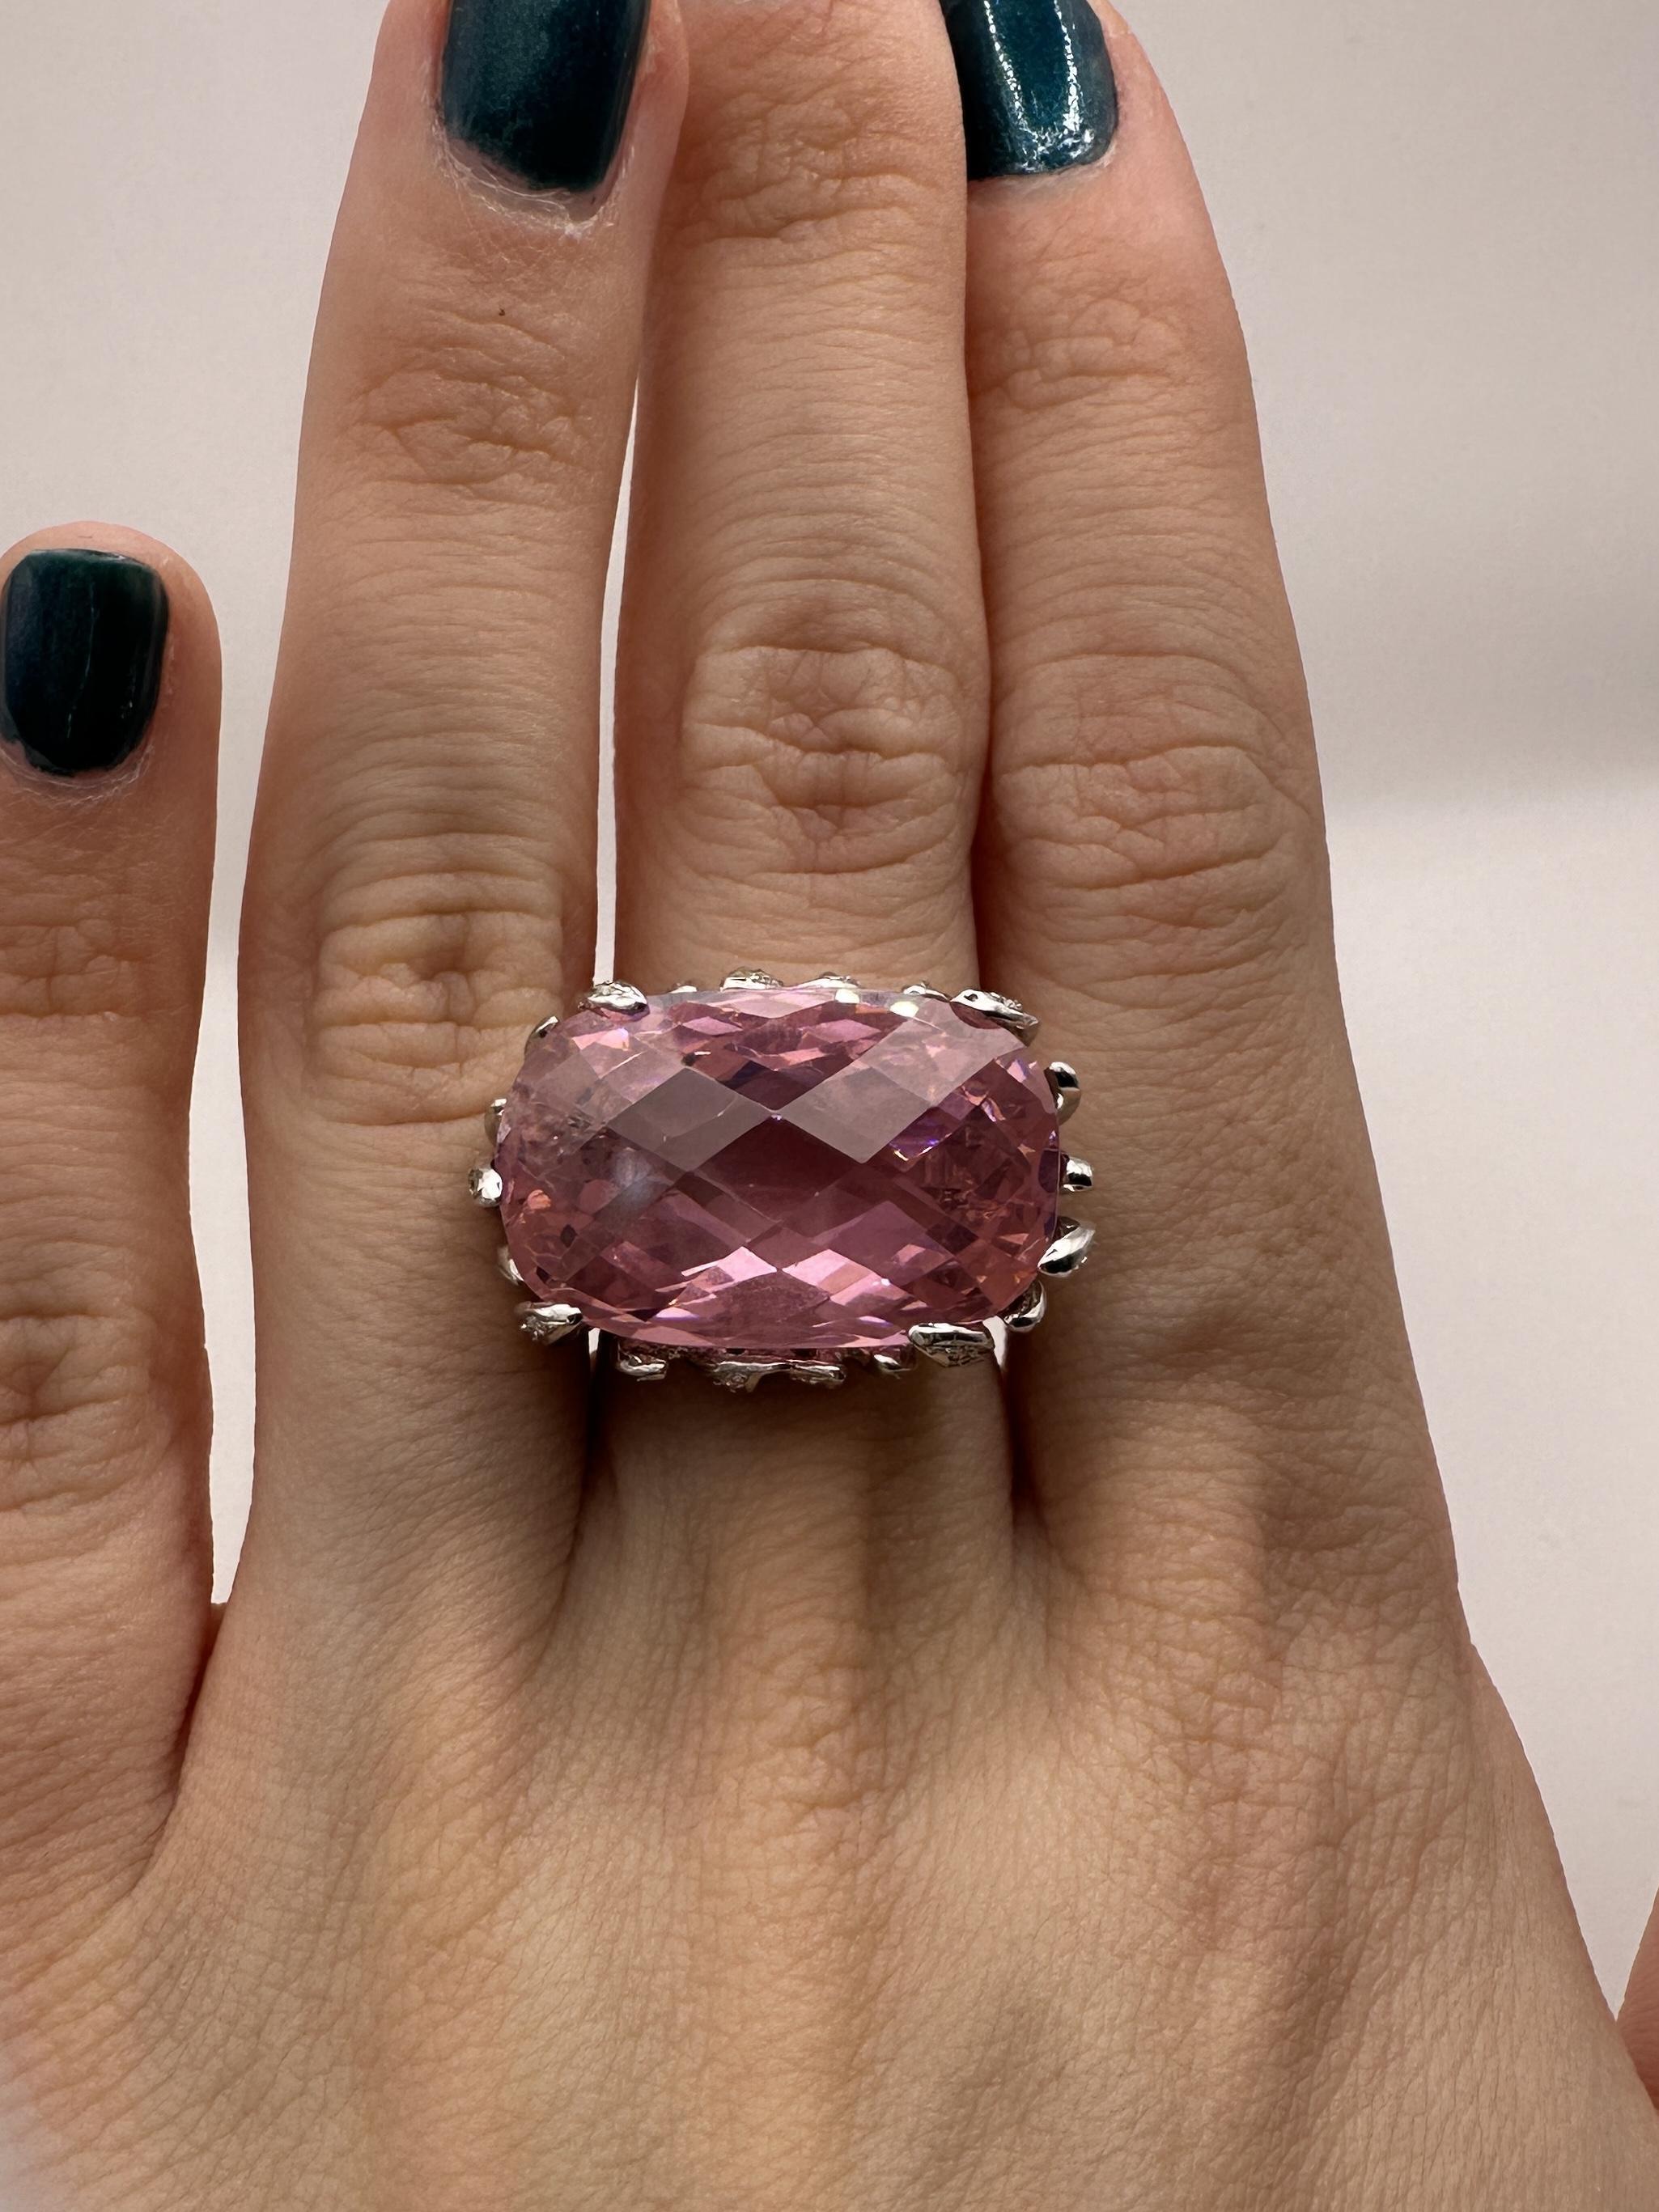 18k Diamond and Checkered Pink Stone Center Cocktail Ring For Sale 2